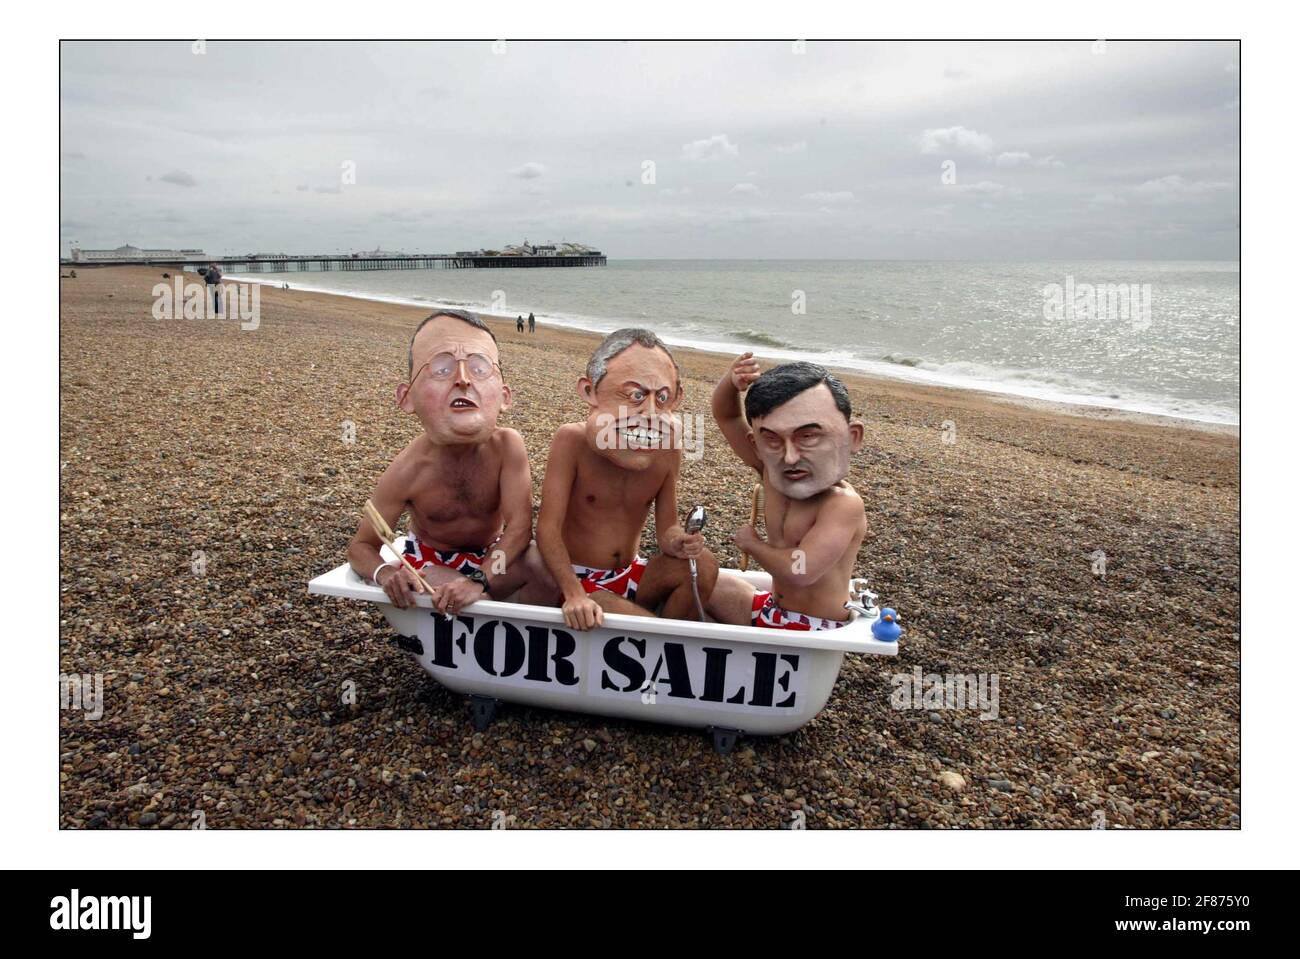 Blair Brown and Benn take a bath in protest against UK support for water privatisation in Third World at labour party conf brightonpic David Sandison 28/9/2005 Stock Photo